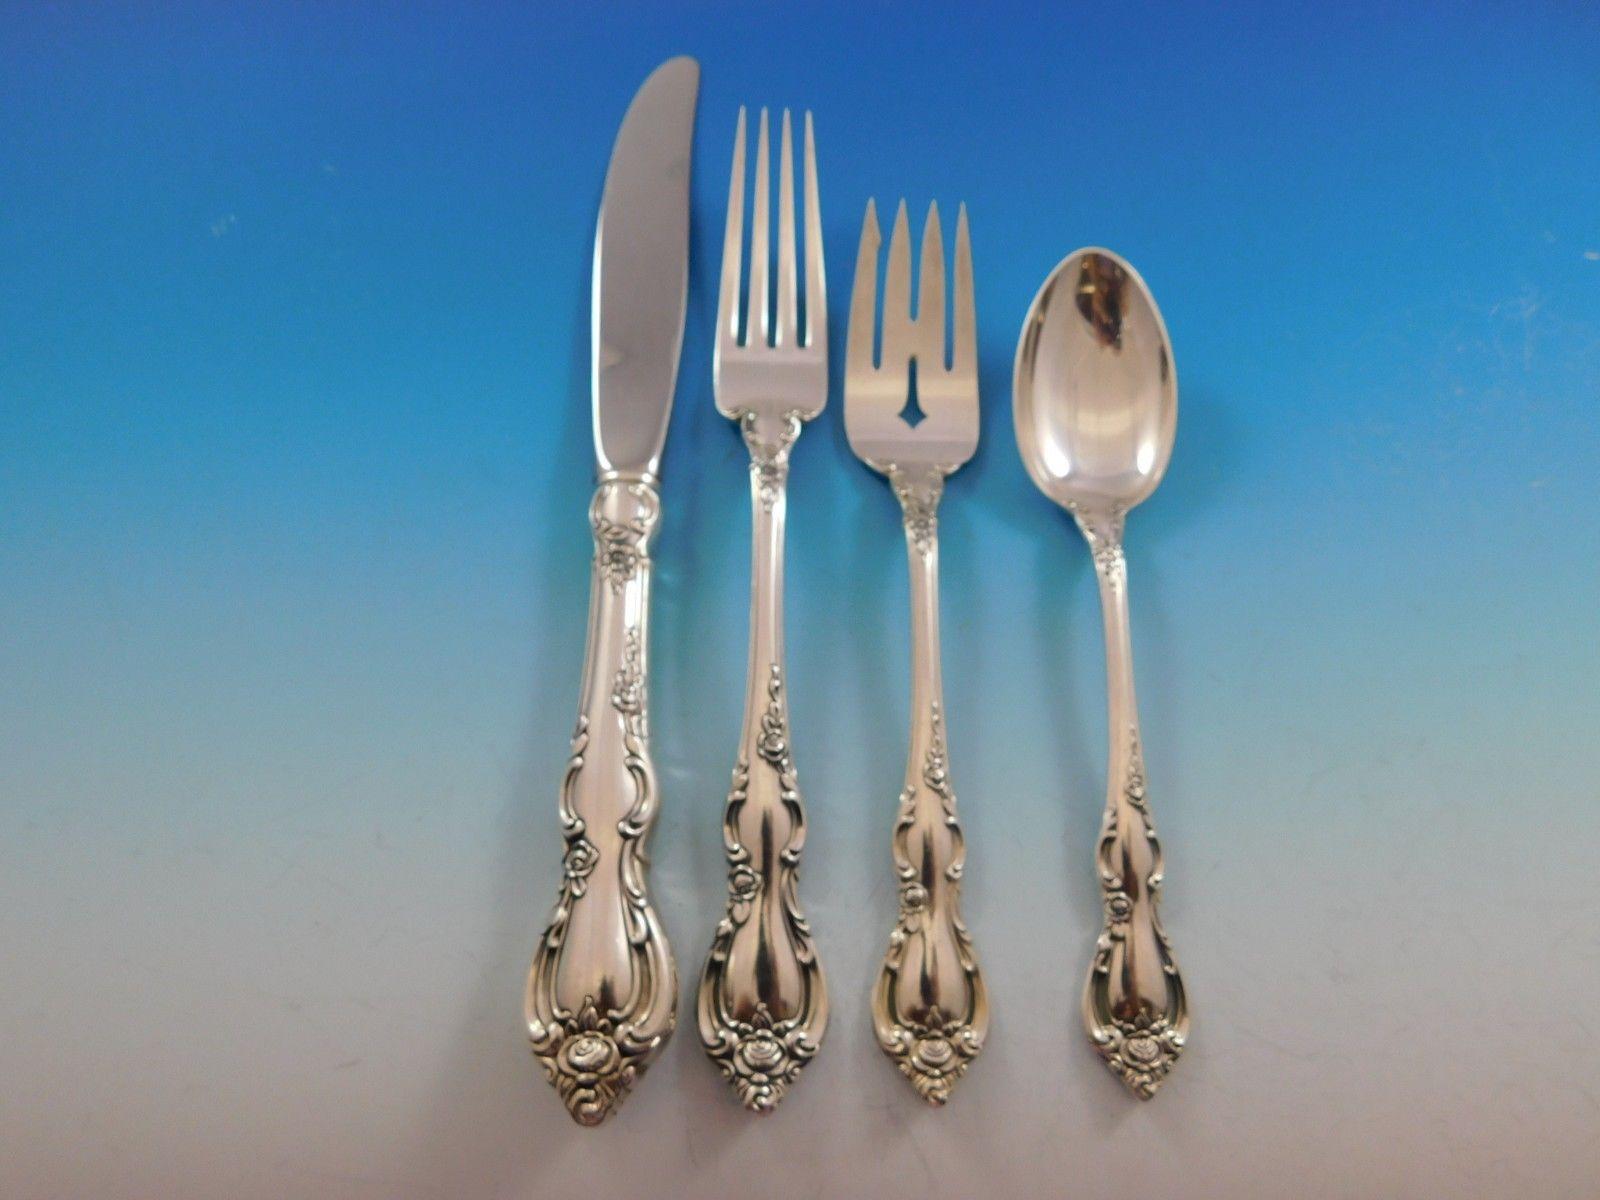 Baroque Spanish Provincial by Towle Sterling Silver Flatware Set 12 Service 89 Pieces